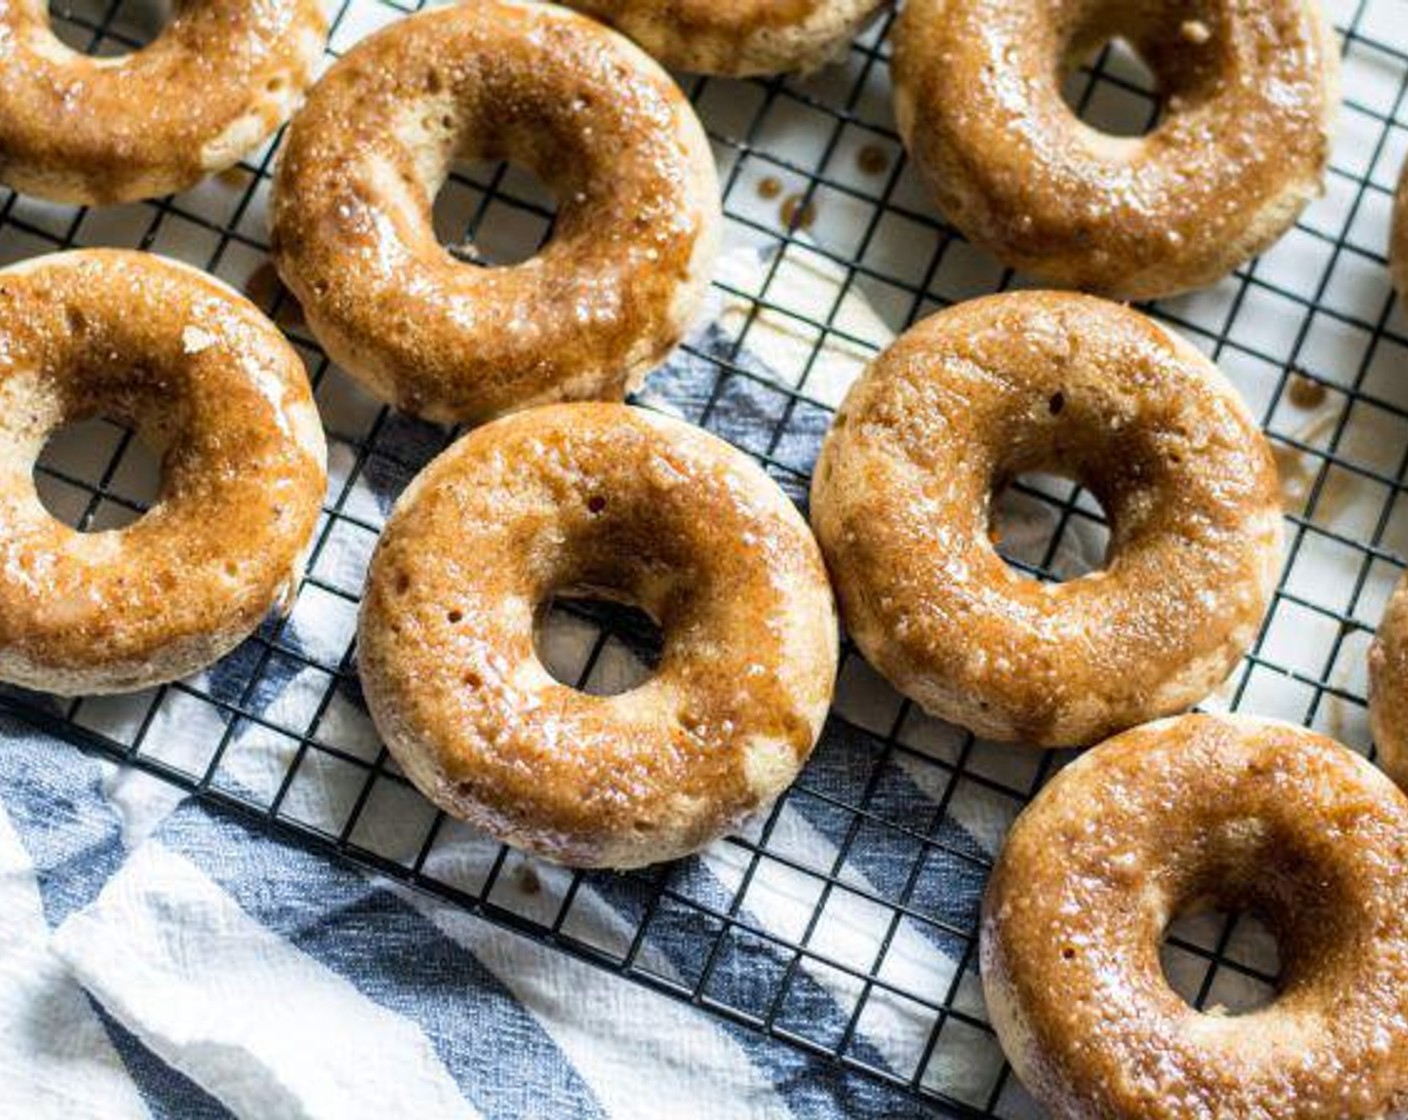 Gluten-Free Maple Baked Donuts with Maple Glaze